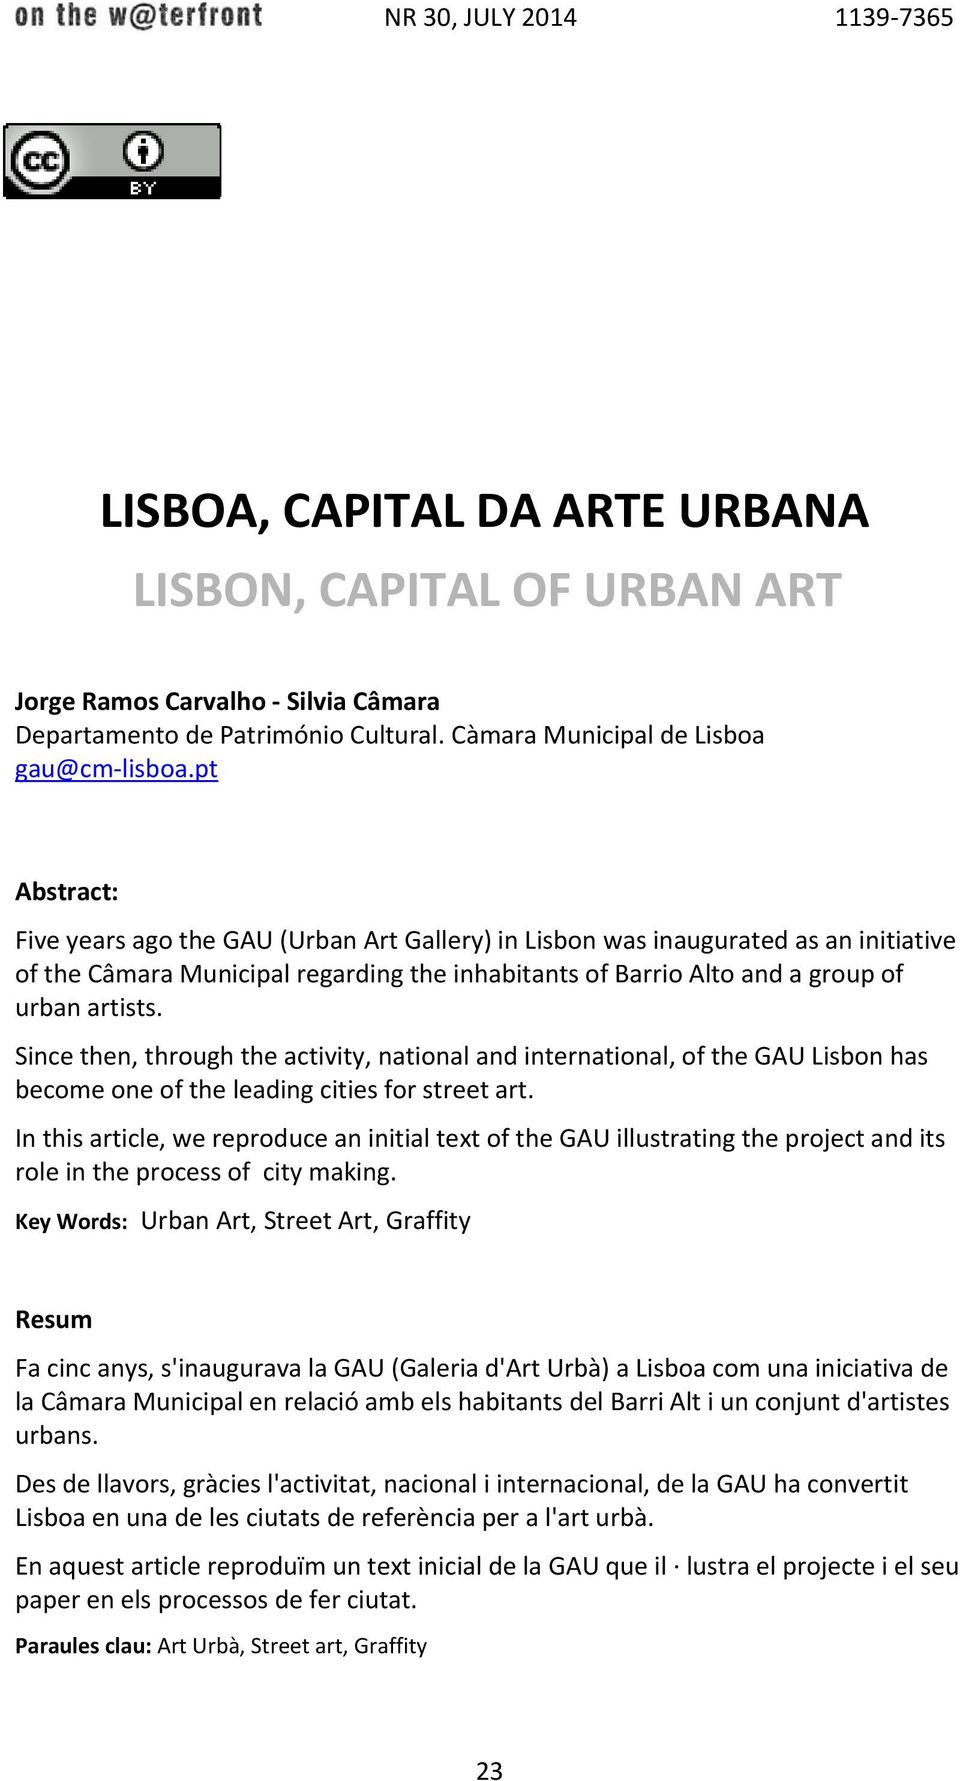 Since then, through the activity, national and international, of the GAU Lisbon has become one of the leading cities for street art.